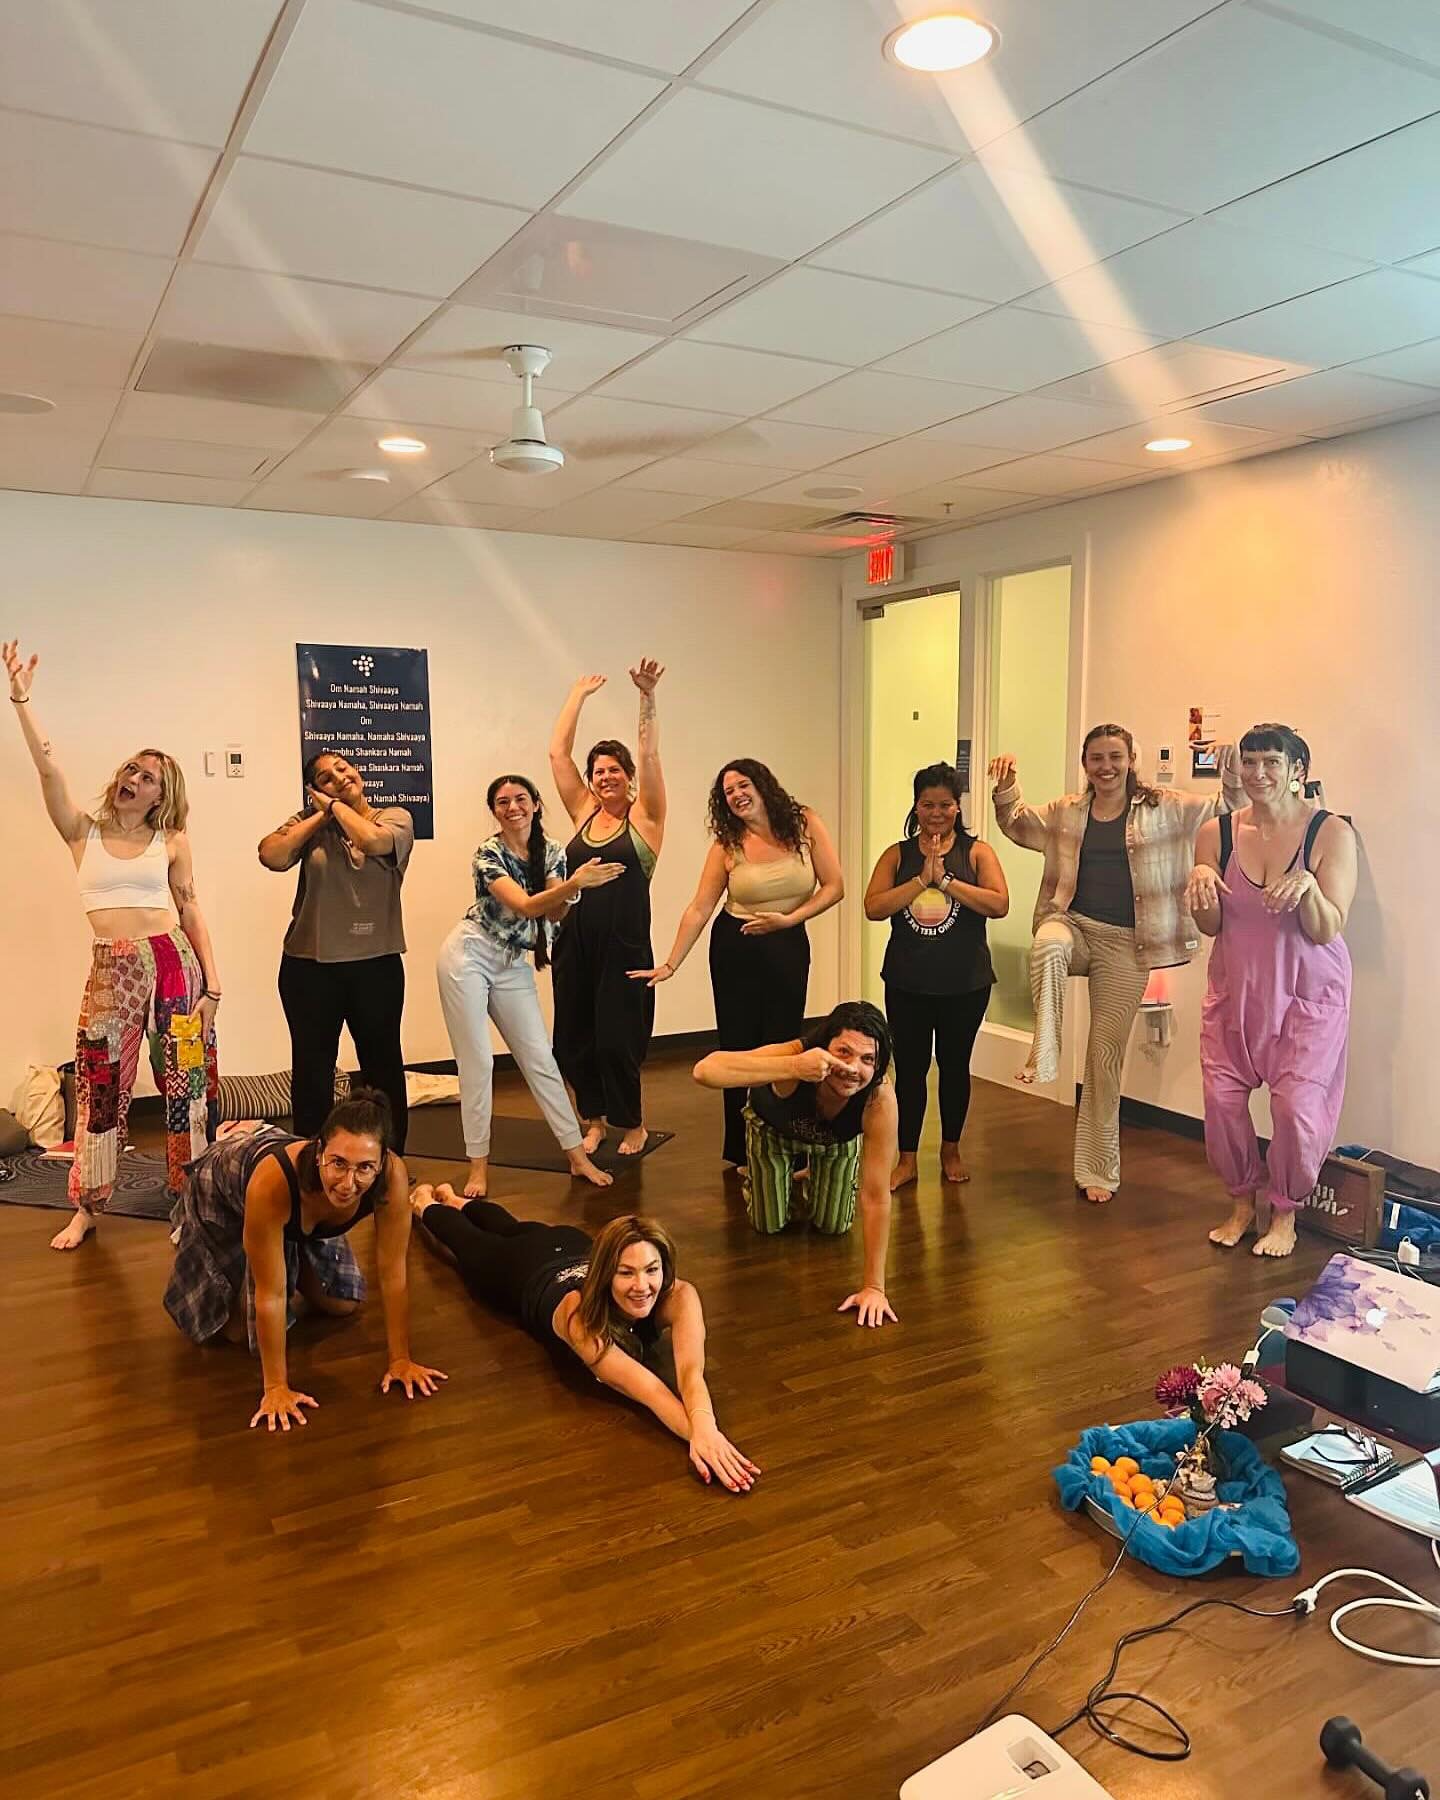 YINSTER sighting in the wild 🤪💙 Our 50-hour yin training has started, and we are just in awe of this wonderful group! @kumariskyyoga and the crew are having so much fun already!

#yogainstructor #yogapodtucson #yogaintucson #tucsonyogacommunity